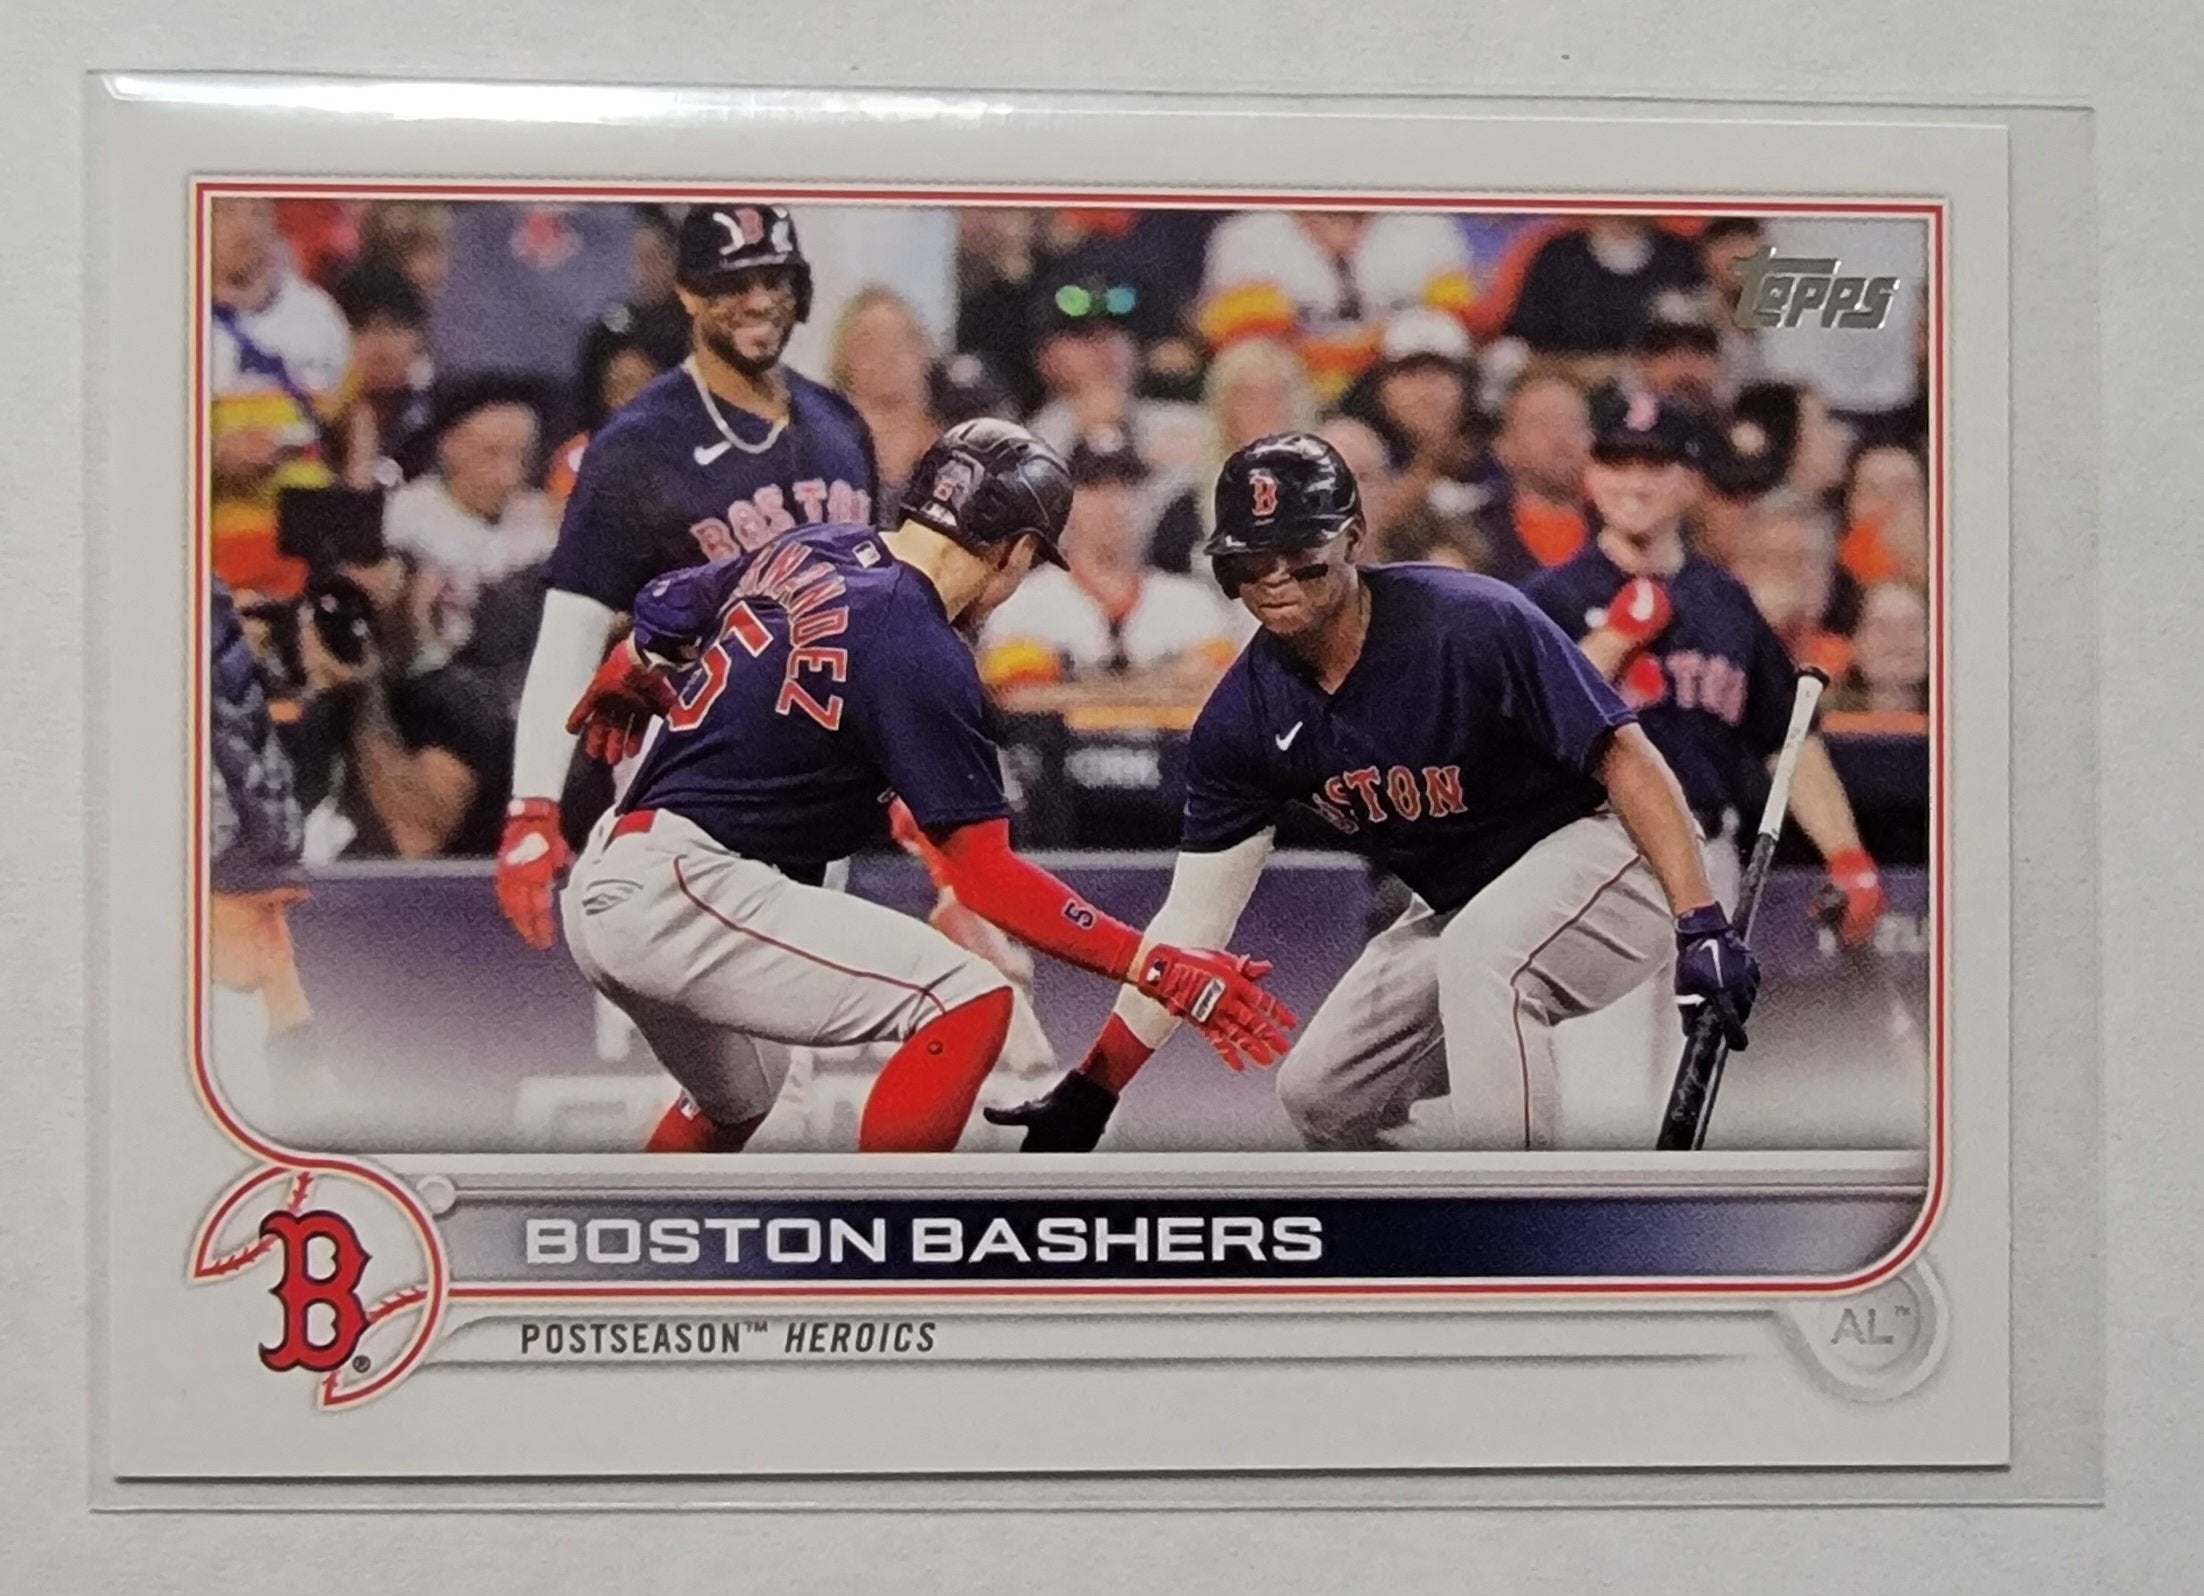 2022 Topps Series 2 Boston Bashers Boston Red Sox Team Baseball Card AVM1 simple Xclusive Collectibles   